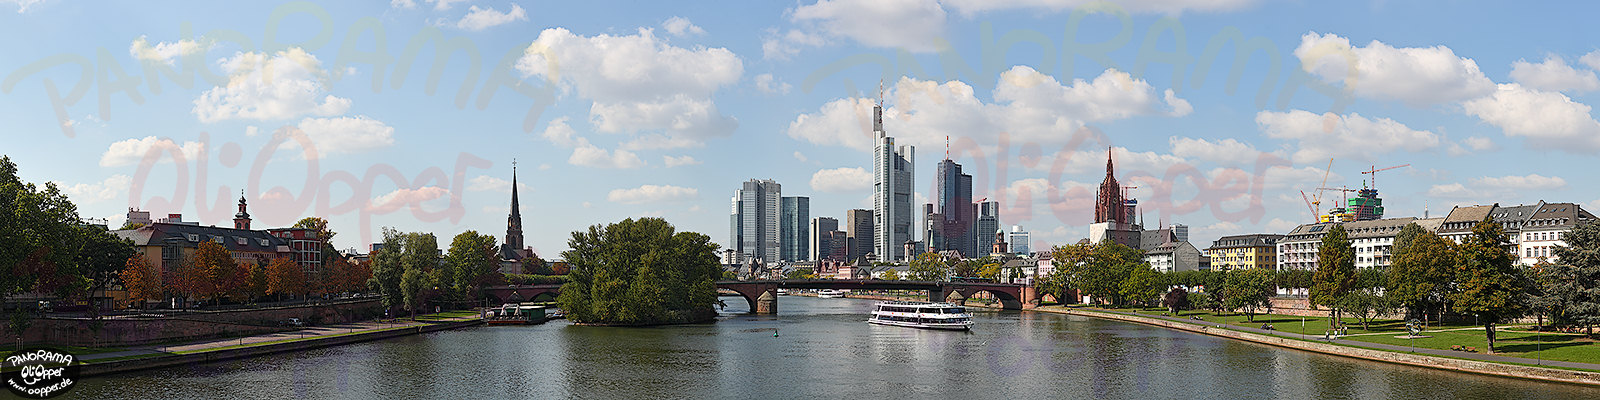 Panorama Frankfurt - Skyline am Tag - p304 - (c) by Oliver Opper